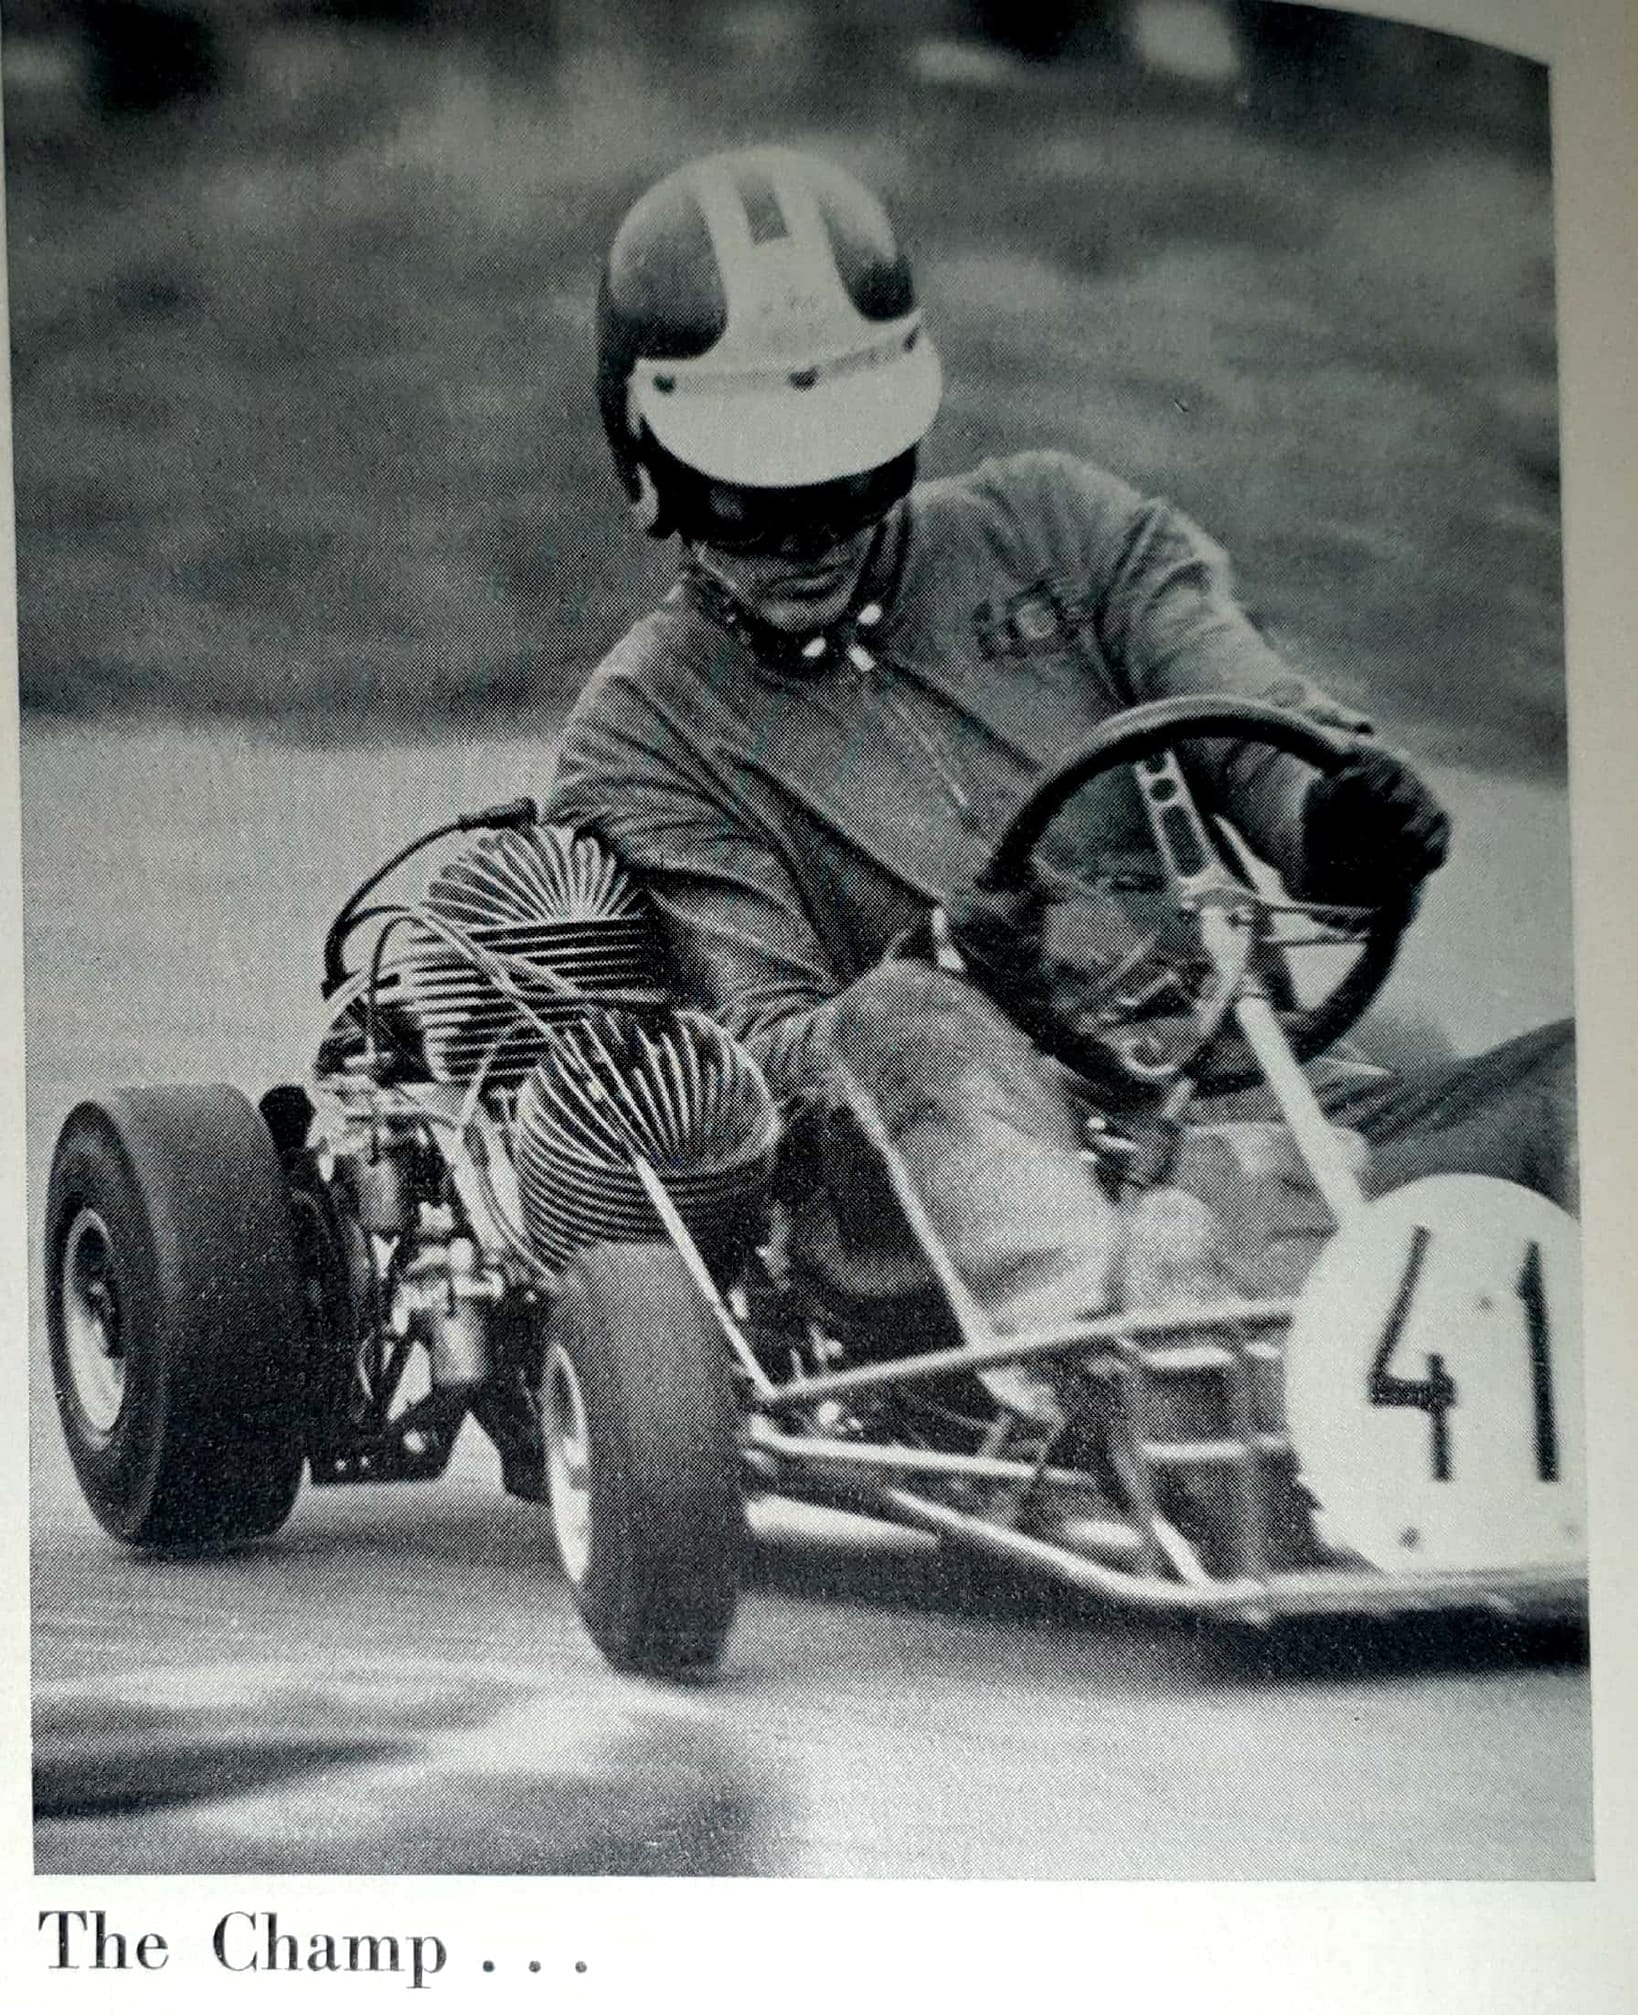 Ronnie Peterson driving his kart in 1965.